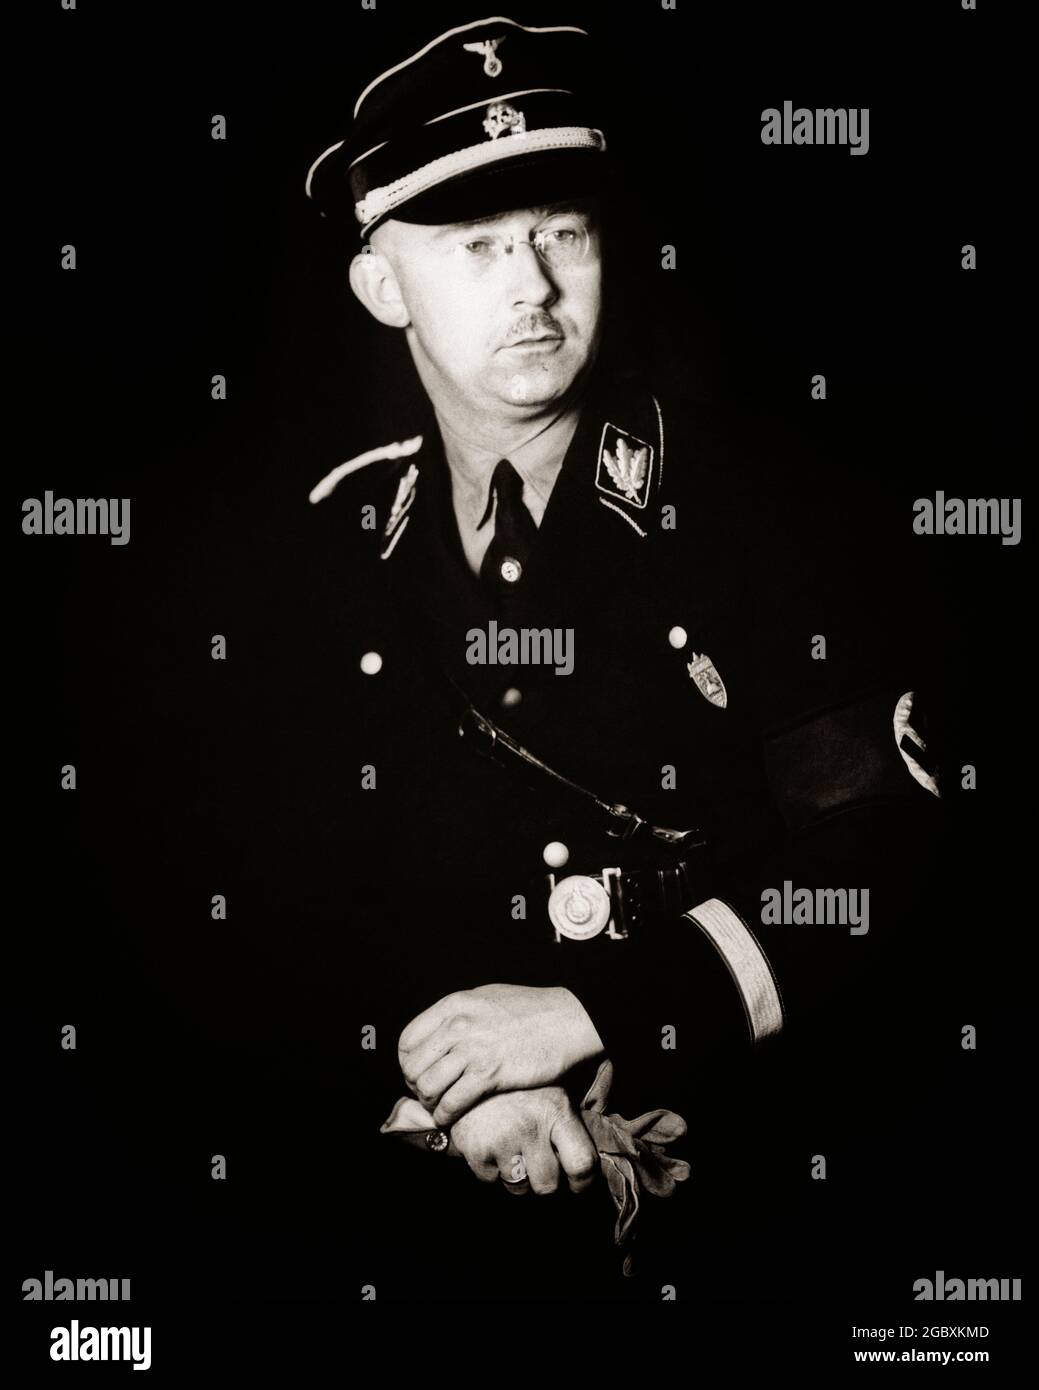 1930s 1940s PORTRAIT OF HEINRICH HIMMLER HEAD OF SS GESTAPO AND OVERSEER OF HOLOCAUST CONCENTRATION CAMPS NAZI WW2  - q72084 CPC001 HARS OCCUPATIONS UNIFORMS HOLOCAUST NAZI WORLD WAR 2 BRUTAL AMBITIOUS CAMPS MID-ADULT MID-ADULT MAN OVERSEER SHREWD SS SUICIDE ANTI-SEMITE ANTI-SEMITISM BLACK AND WHITE CAUCASIAN ETHNICITY CONCENTRATION DULL OLD FASHIONED Stock Photo